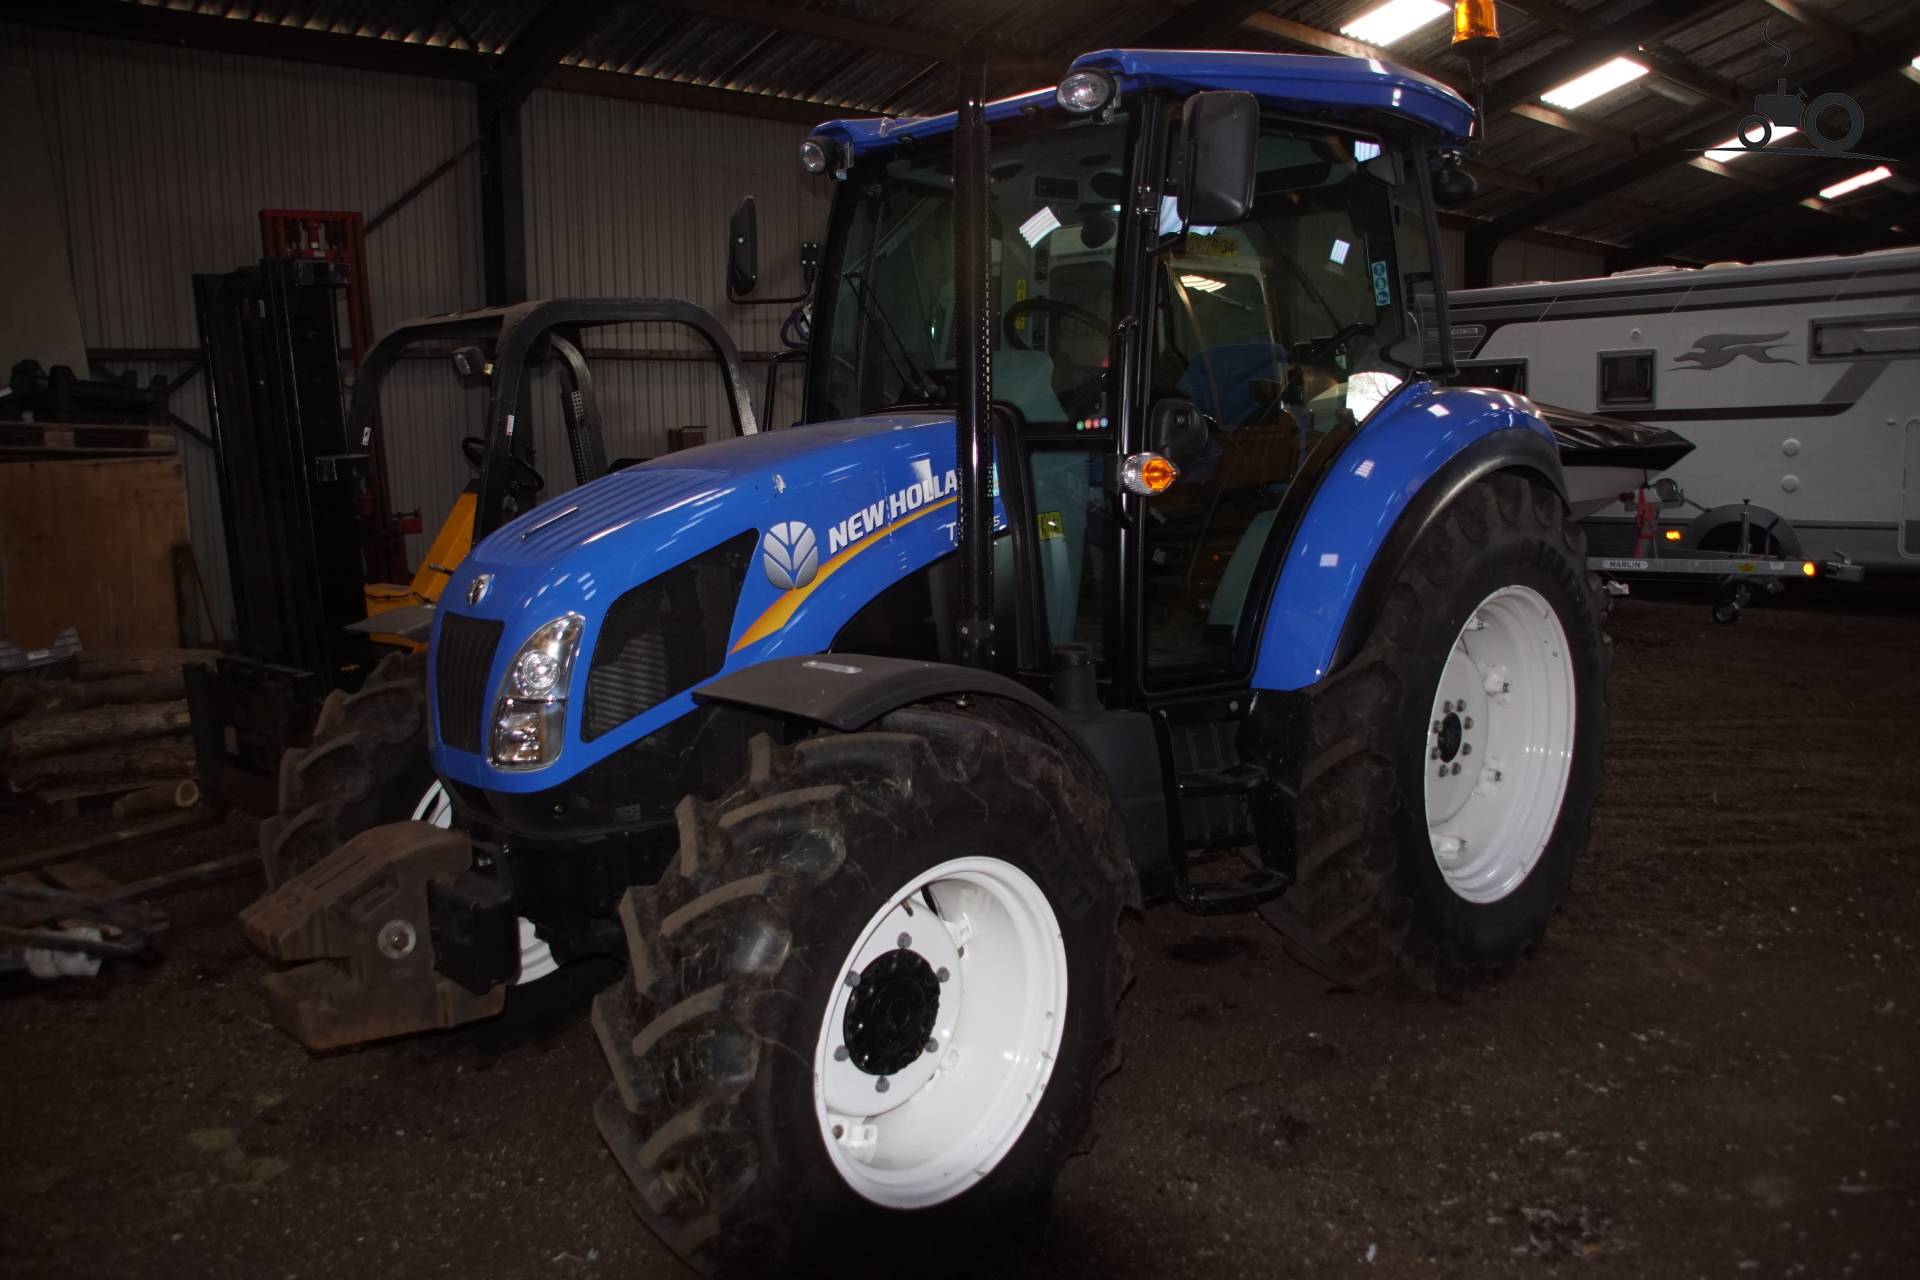 New Holland Td 565 France Tracteur Image 1287970